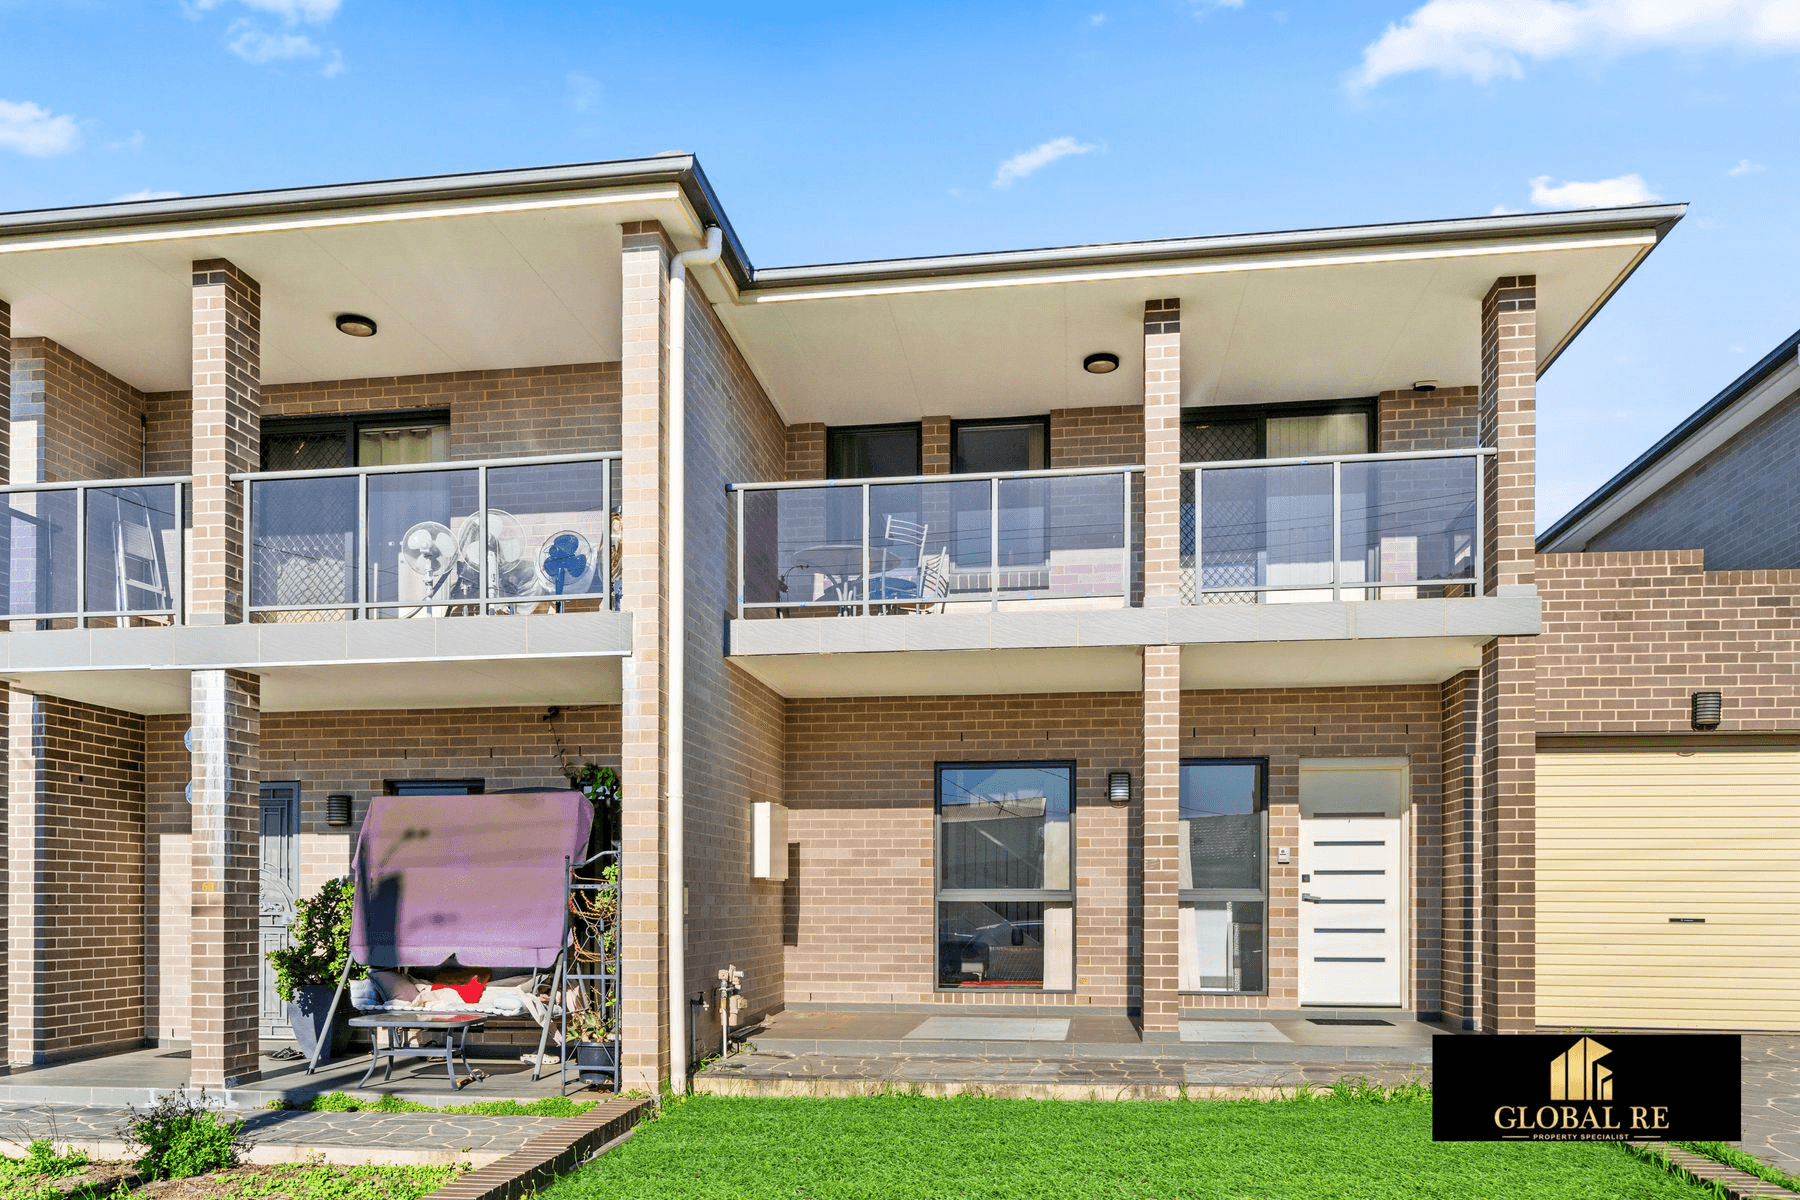 5A Stroker Street, CANLEY HEIGHTS, NSW 2166